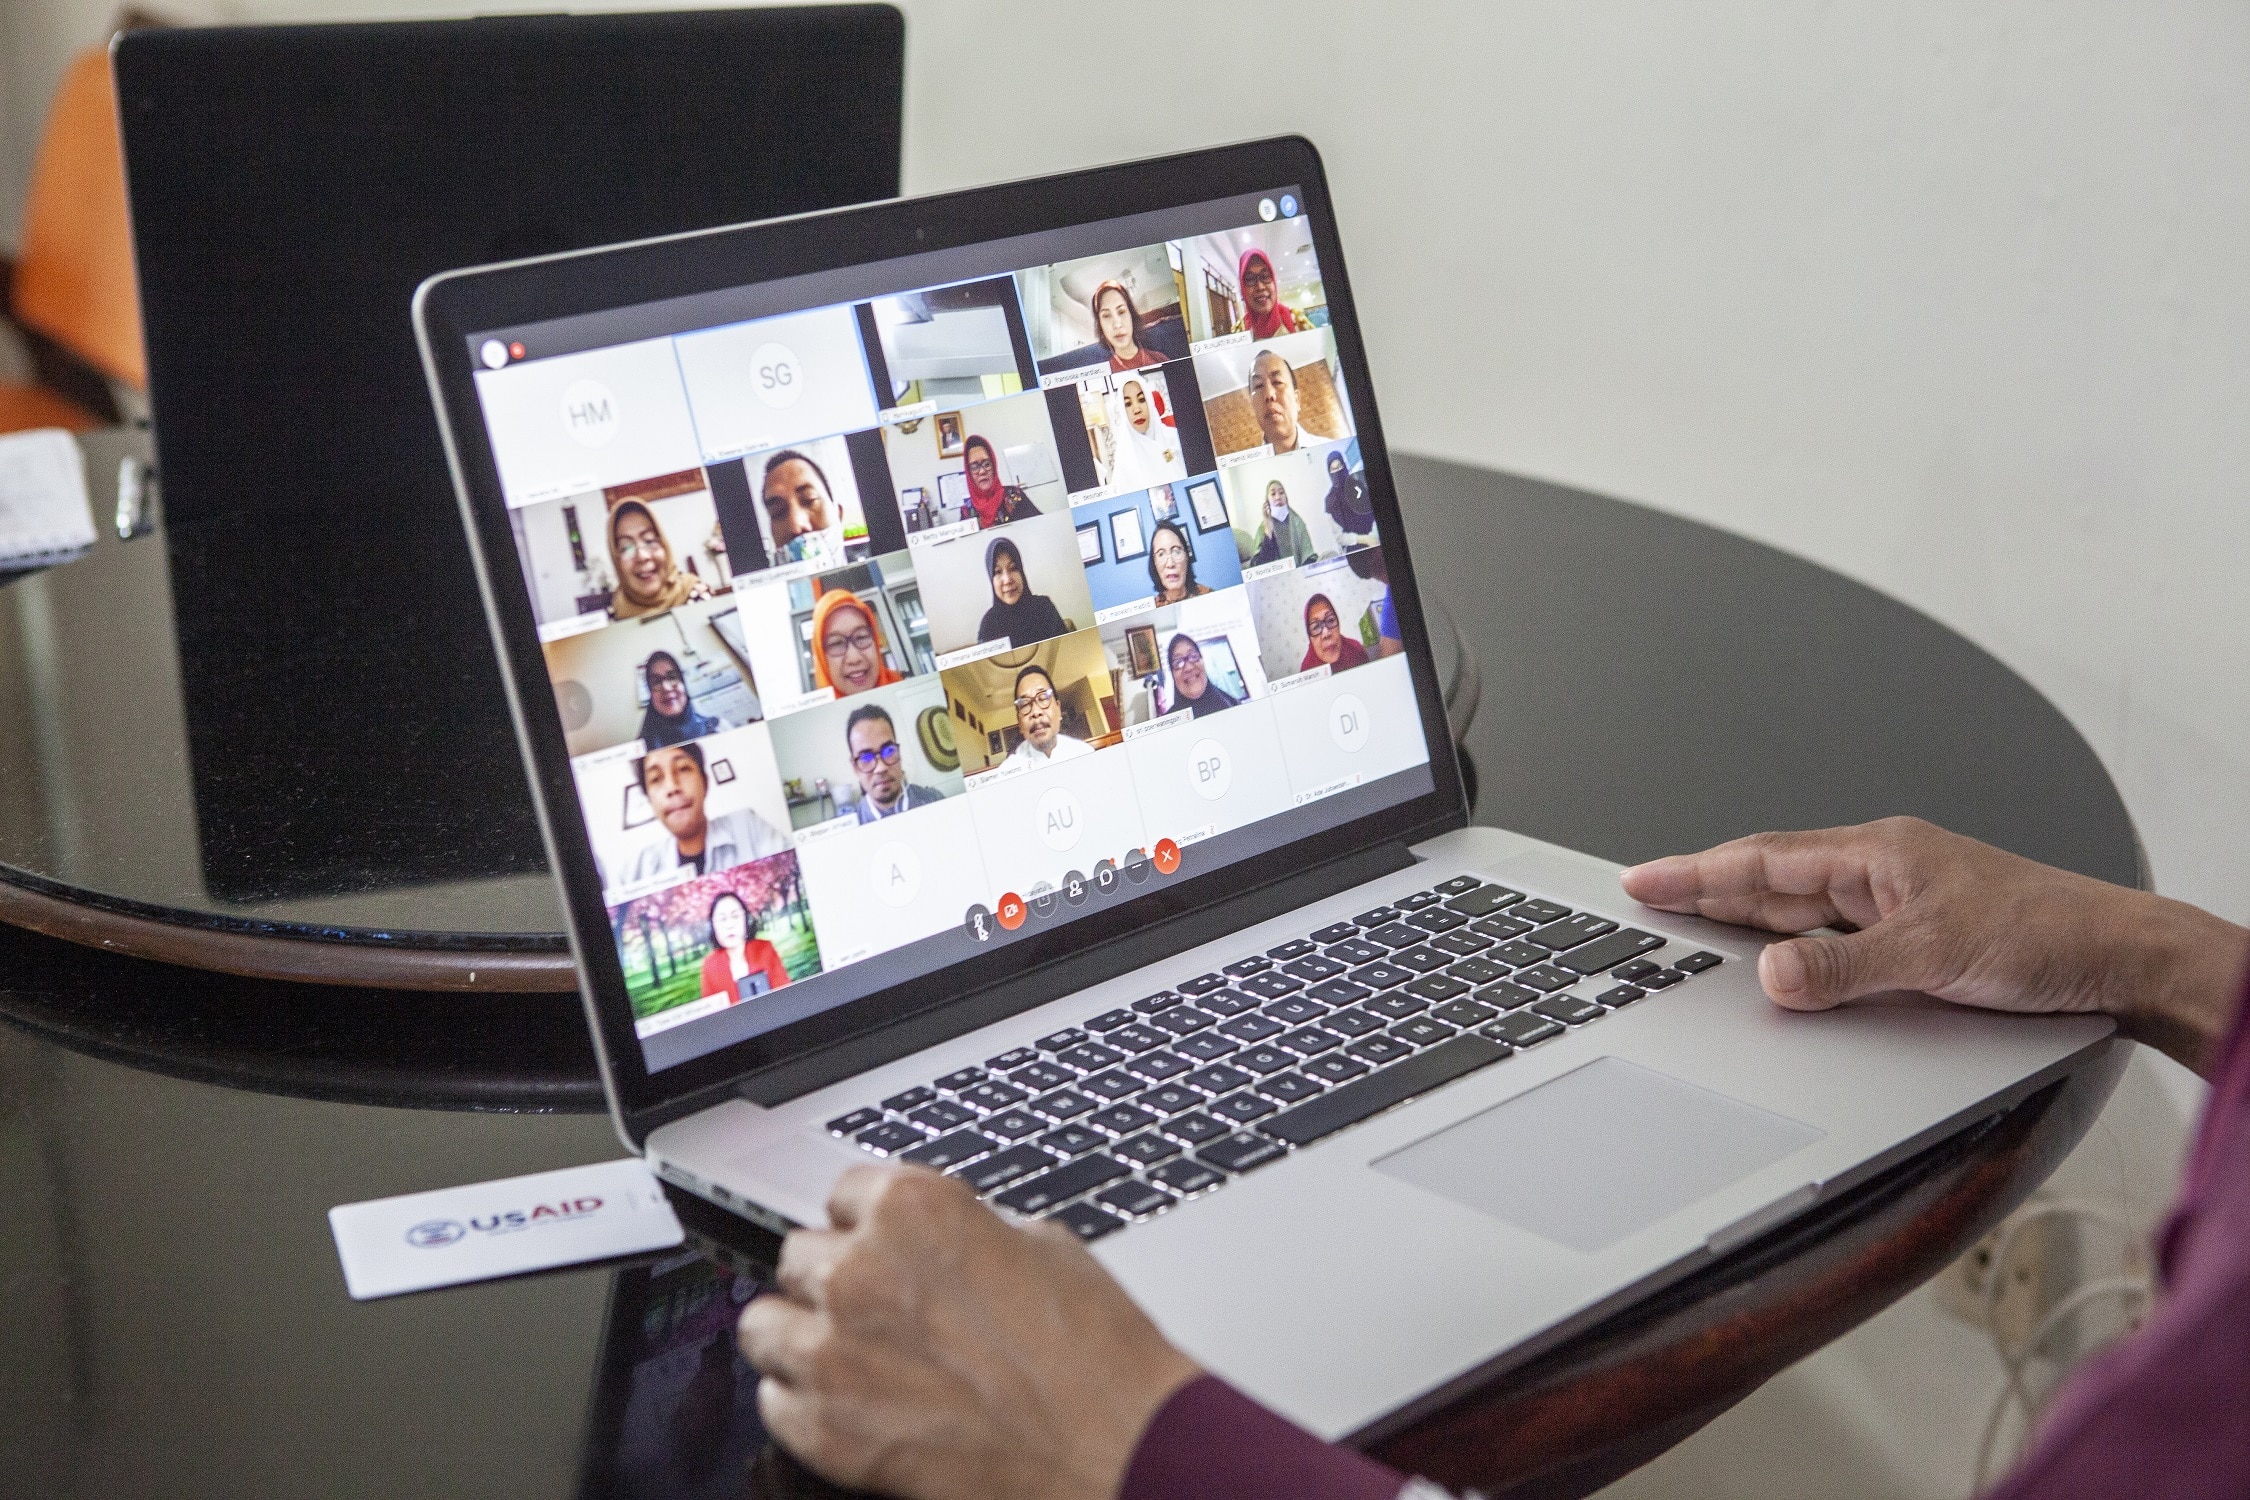 Image of a person participating in a video call using a laptop.